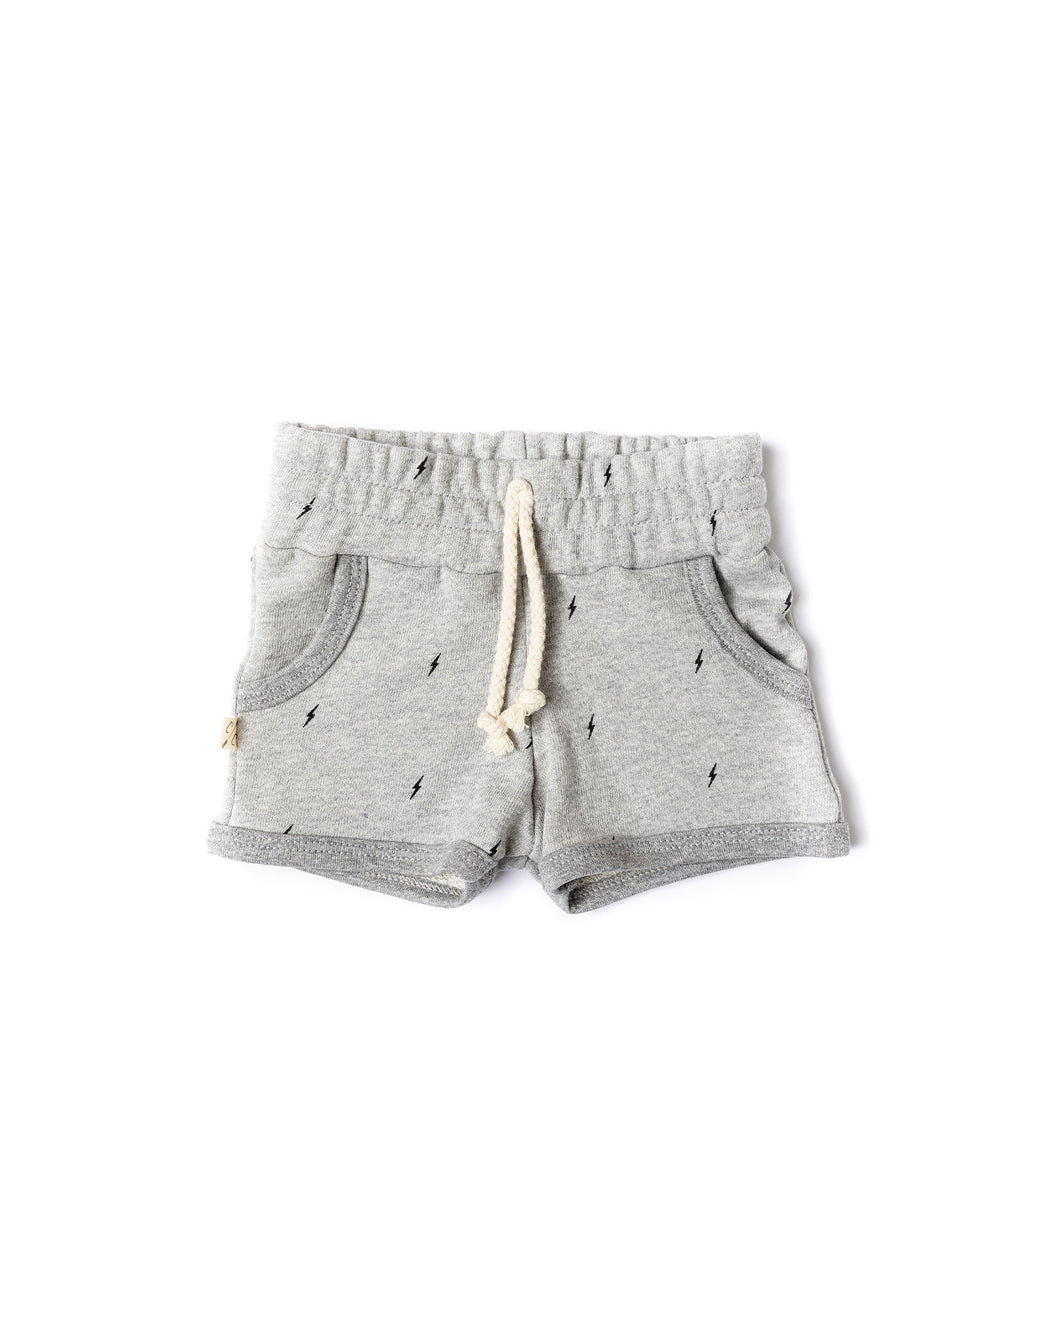 french terry retro short - bolts on pebble